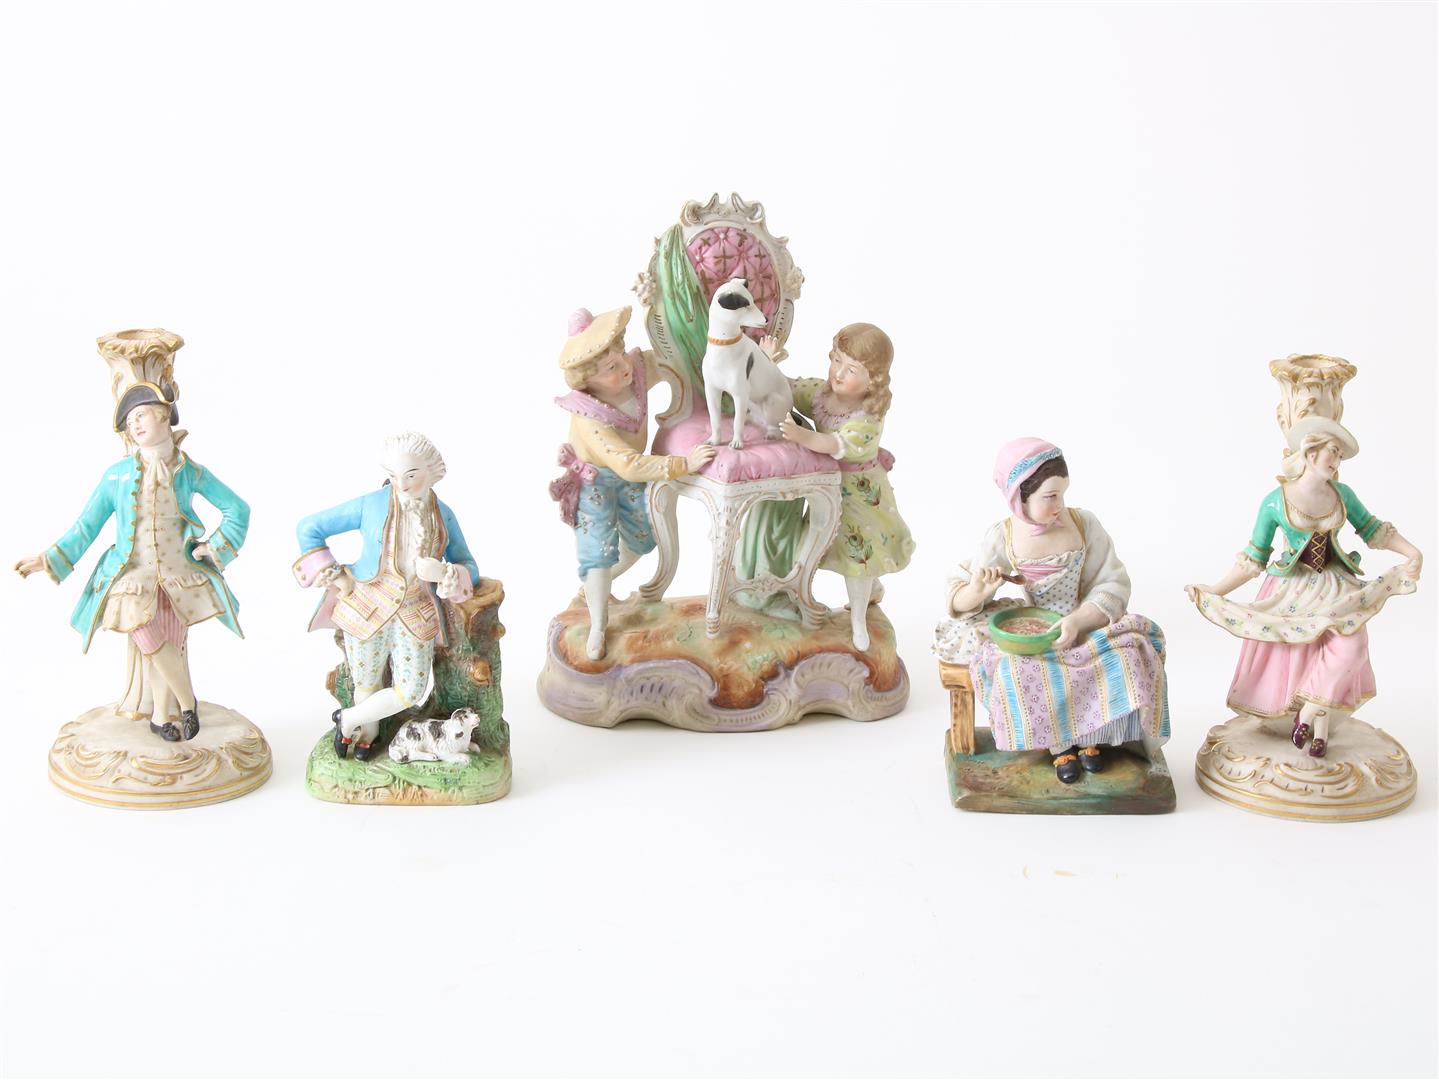 Lot of a polychrome biscuit porcelain sculpture group of 2 children with a dog on a chair, height 28